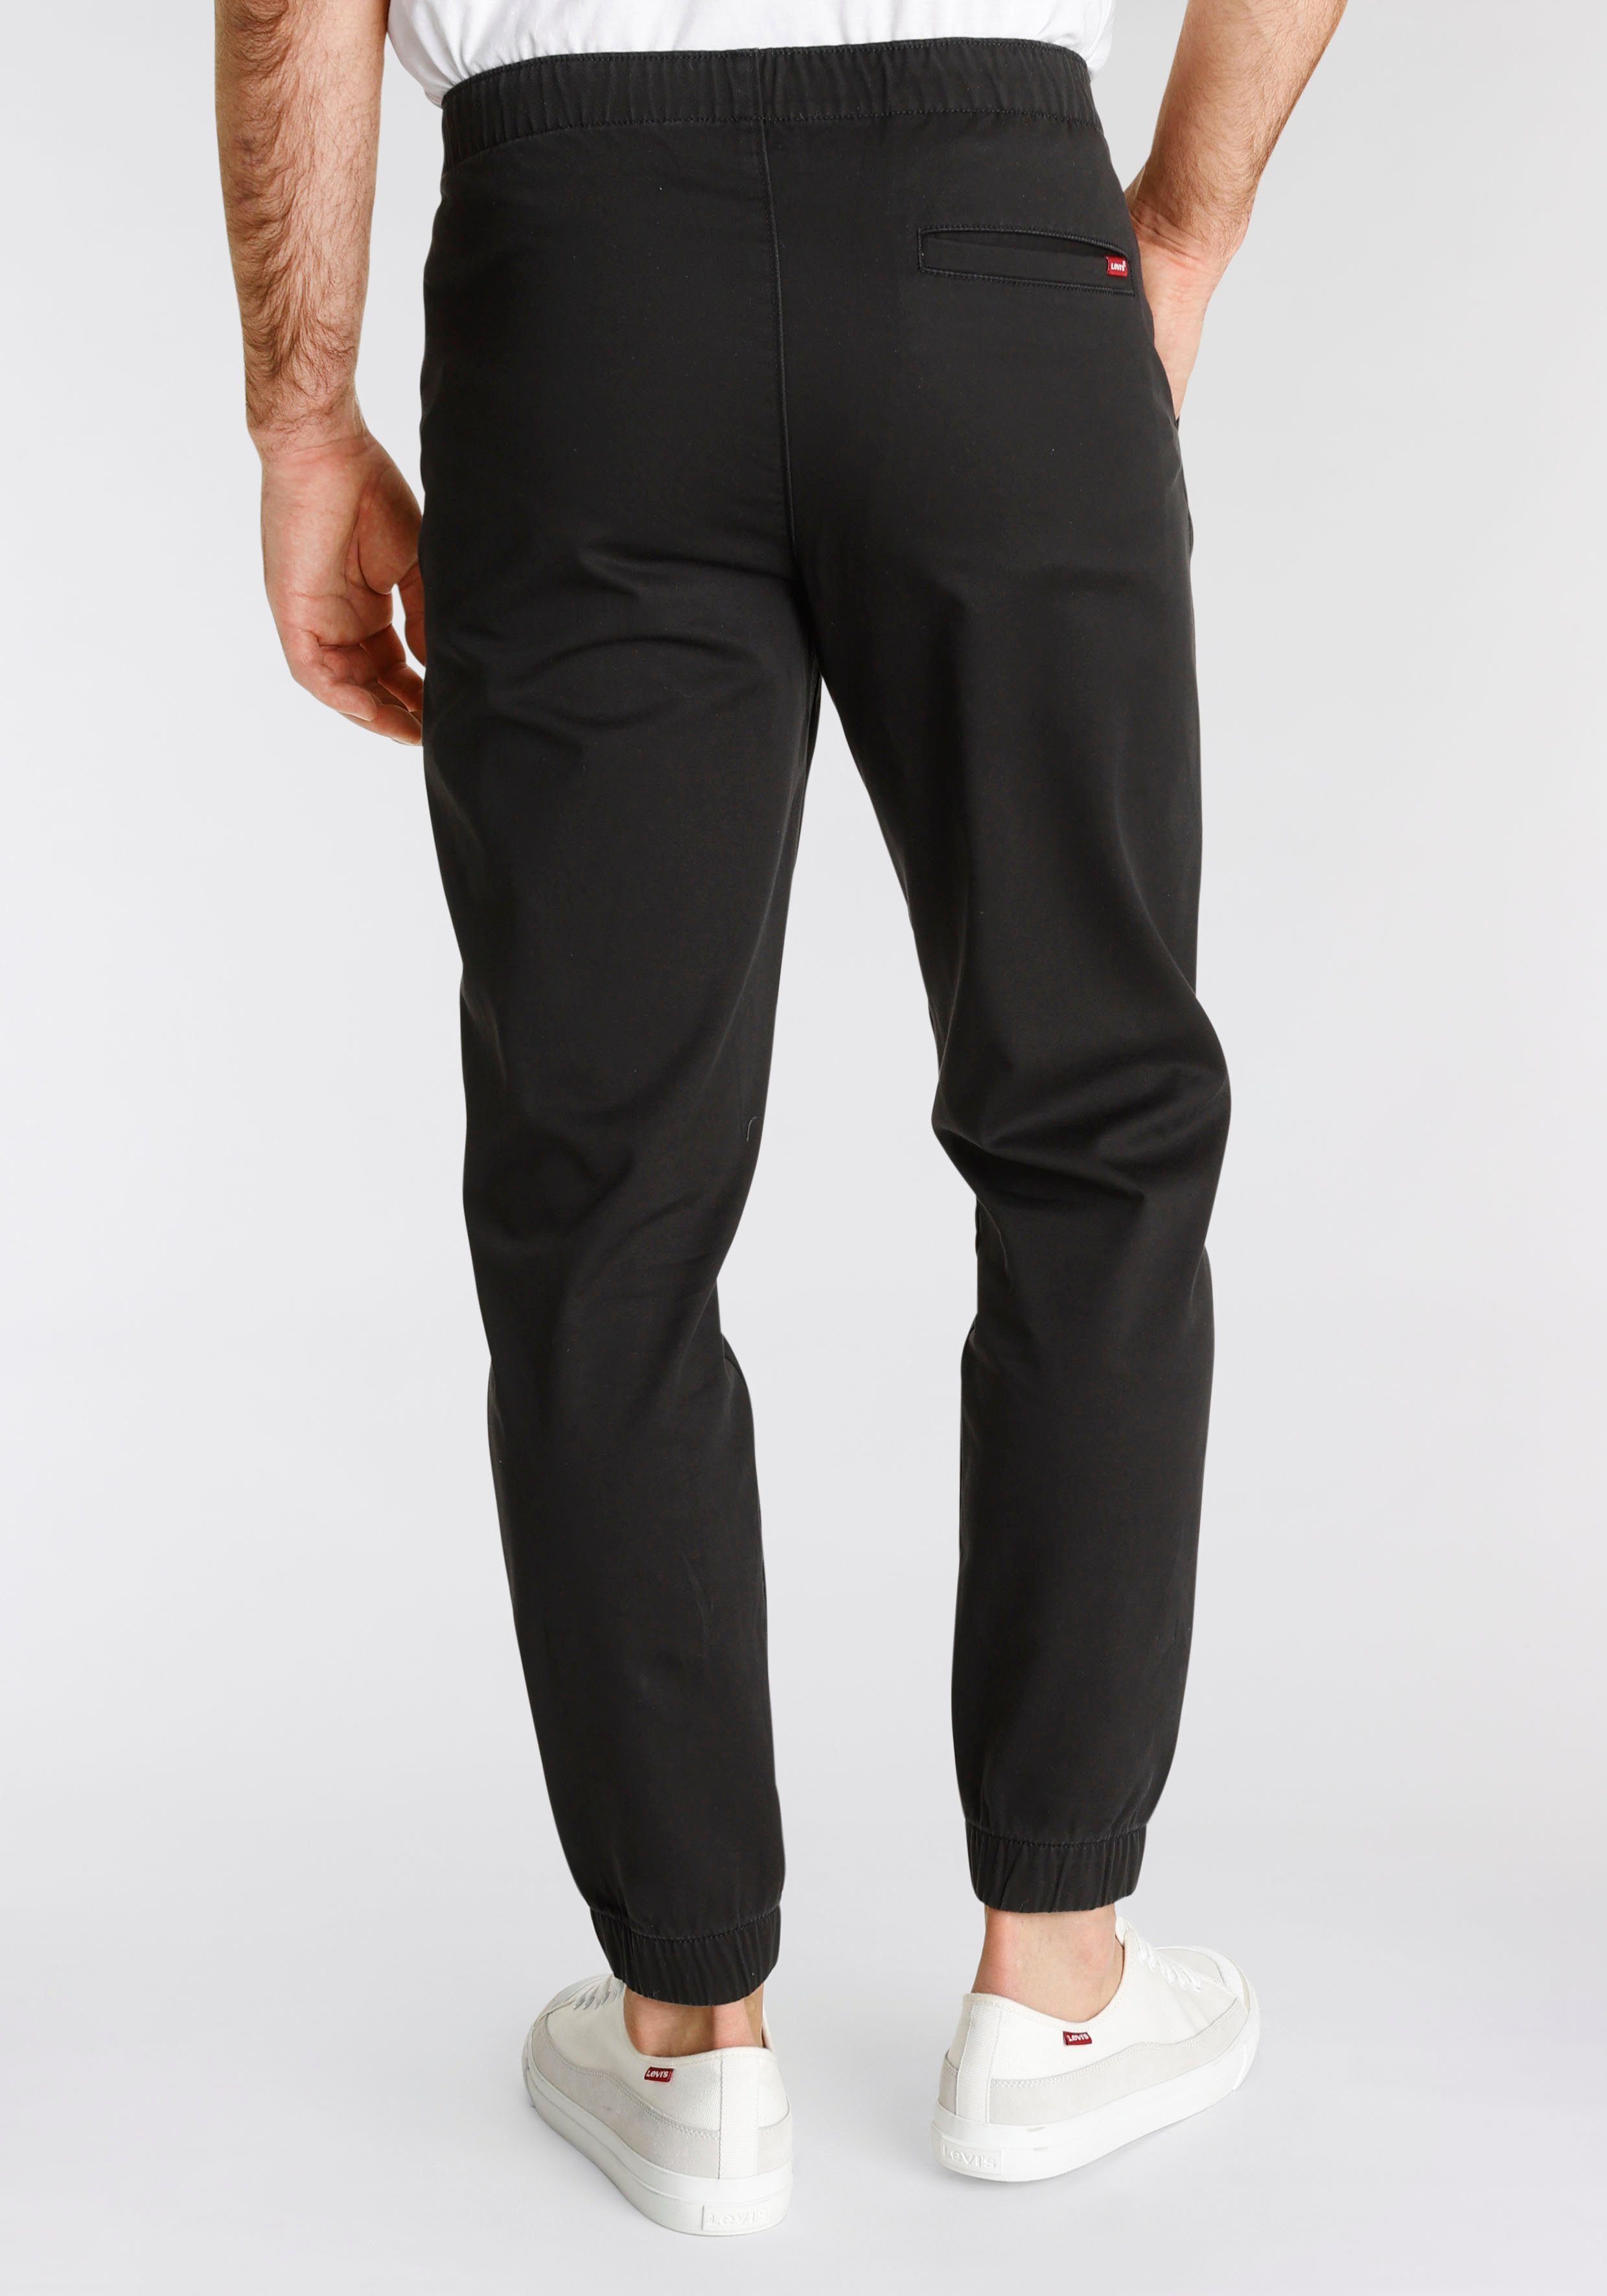 Chinohose LE CHINO JOGGER schwarz III in Levi's® Styling XX leichtes für Unifarbe